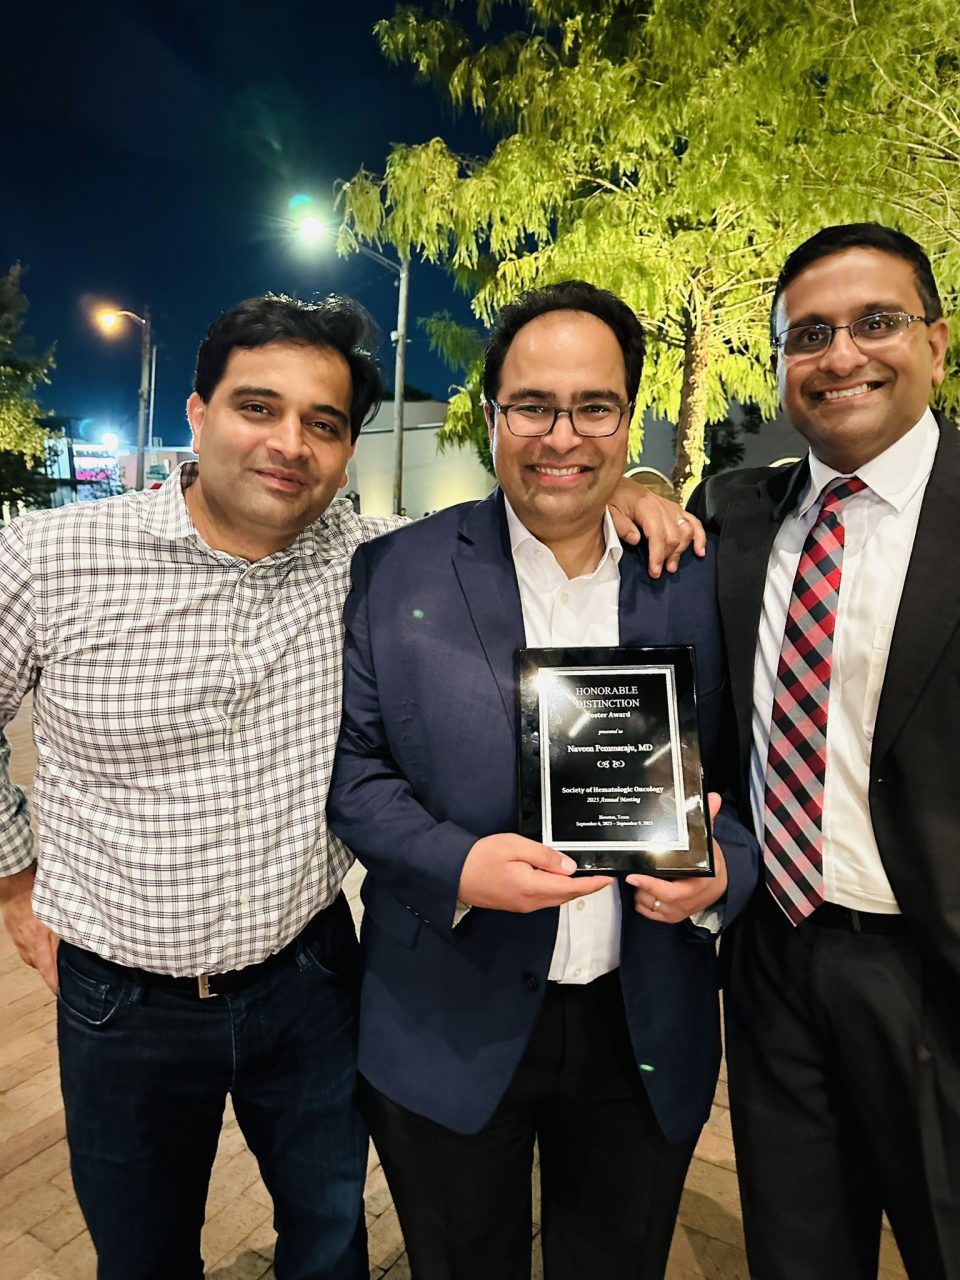 Naveen Pemmaraju: Delighted to be recognized by the Society of Hematologic Oncology for the Honorable Distinction Award